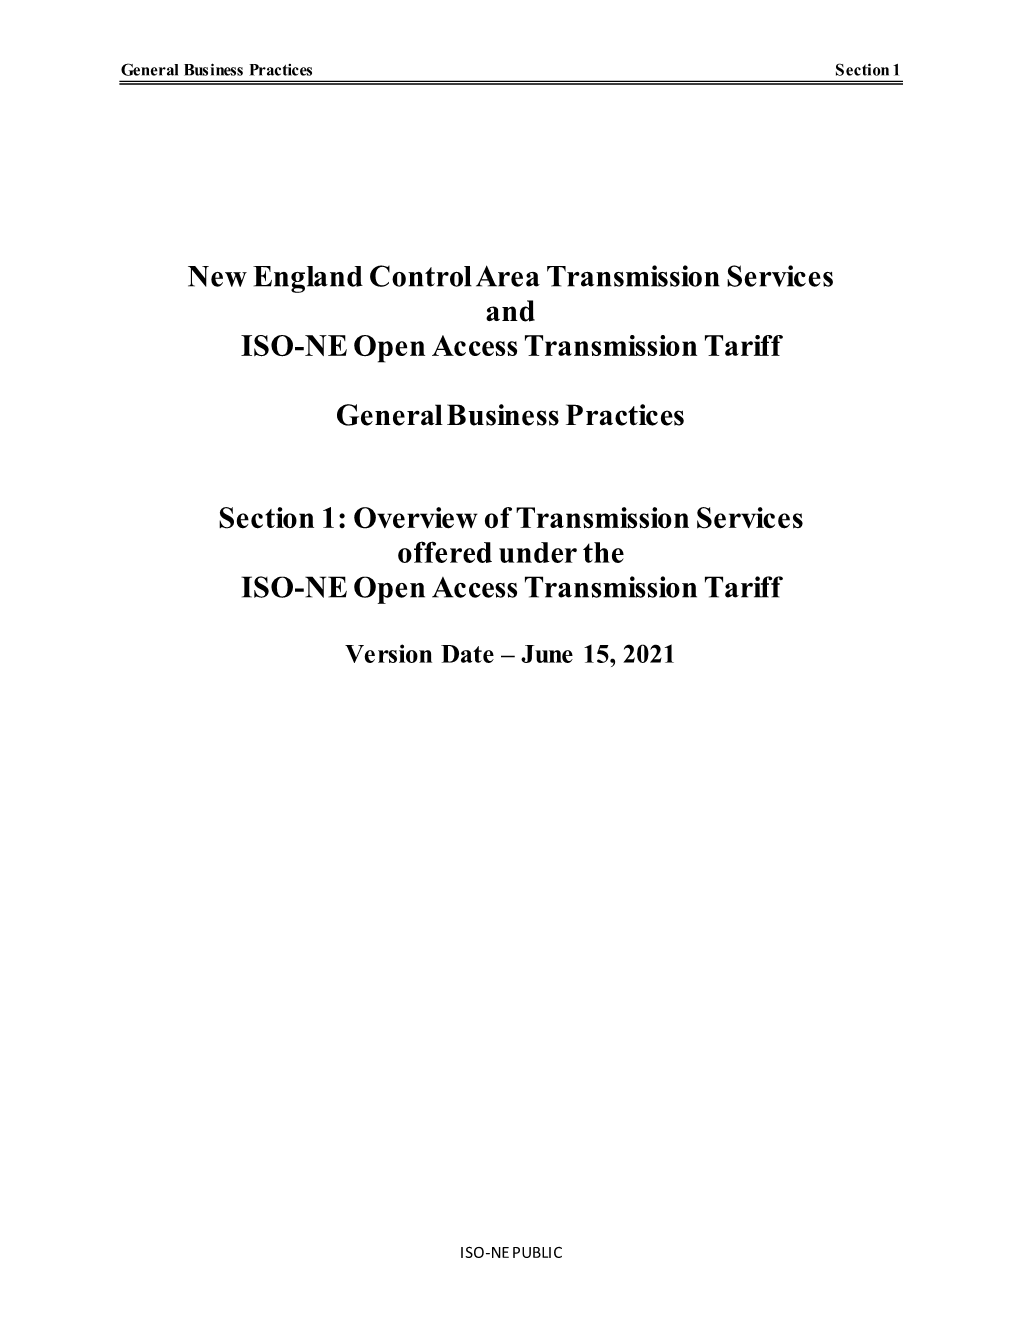 New England Control Area Transmission Services and ISO-NE Open Access Transmission Tariff